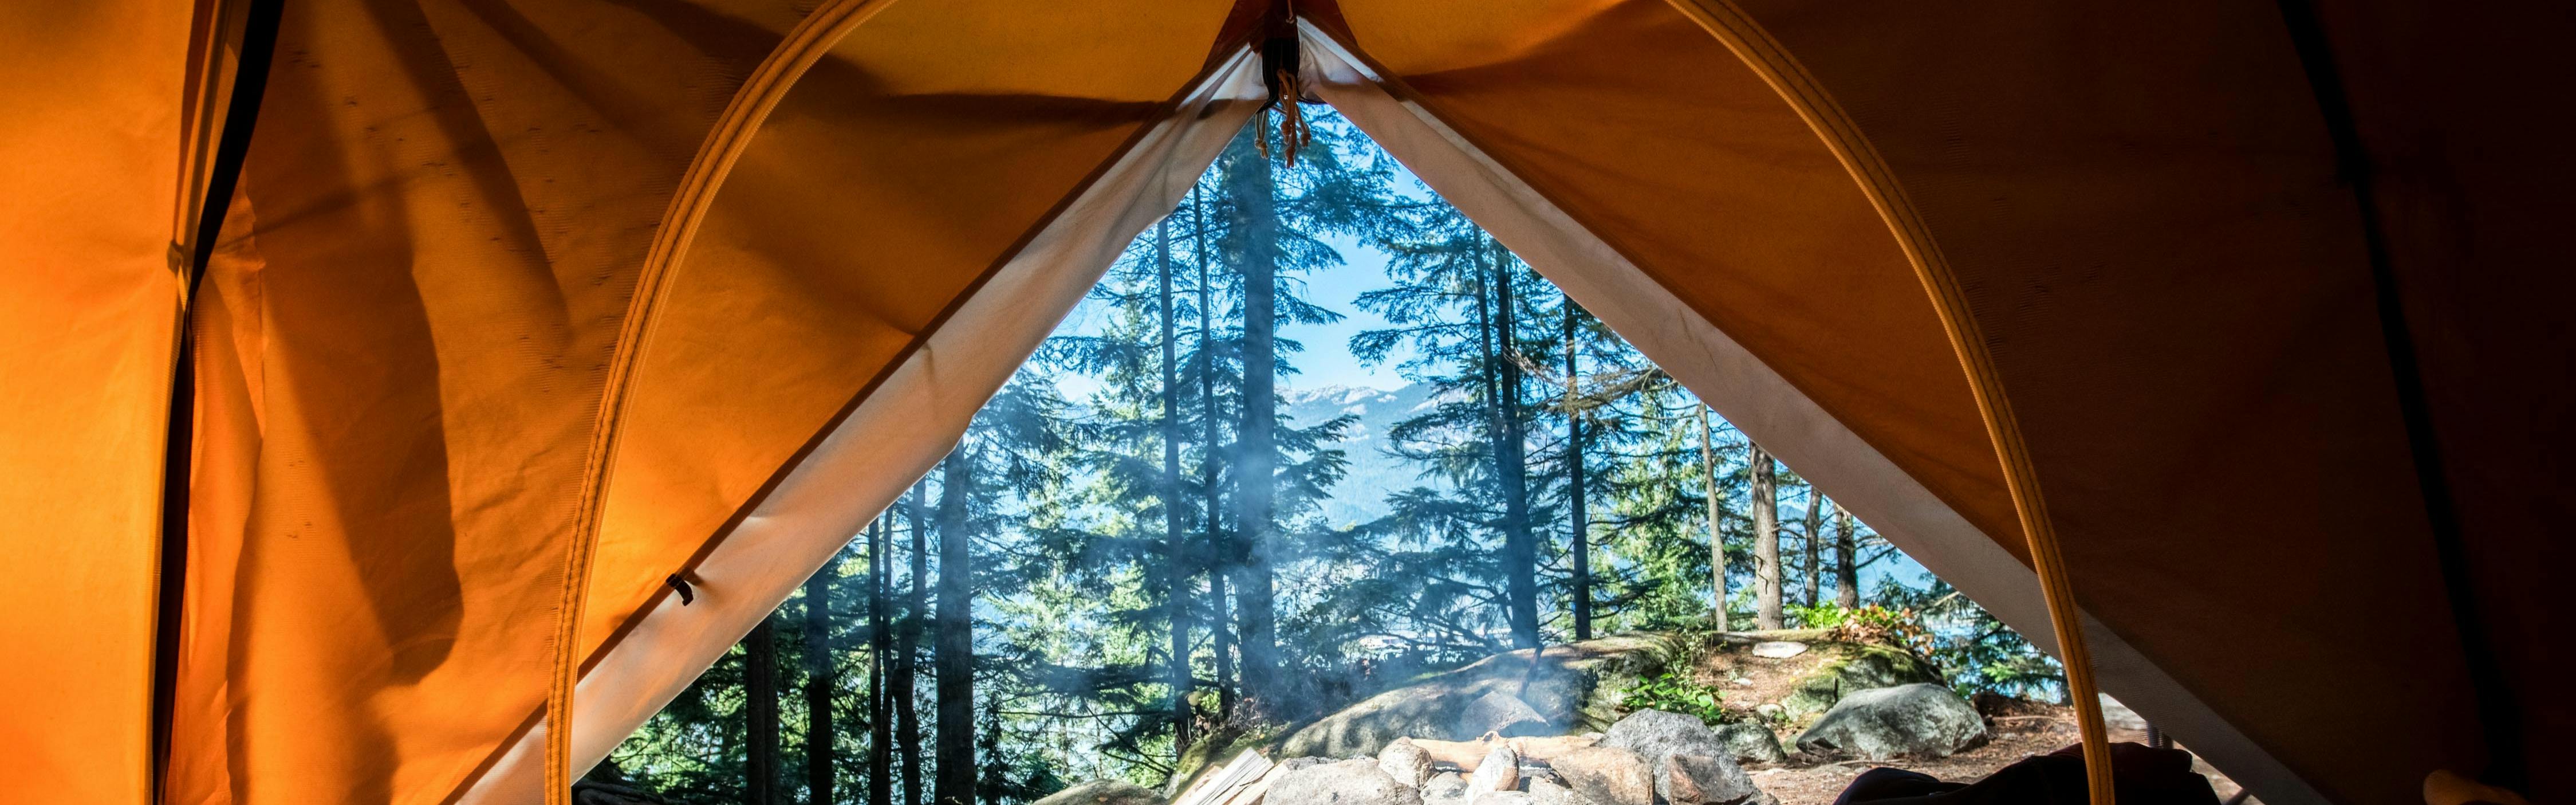 Through the opening of an orange tent, you can see pine trees and blue skies through them.